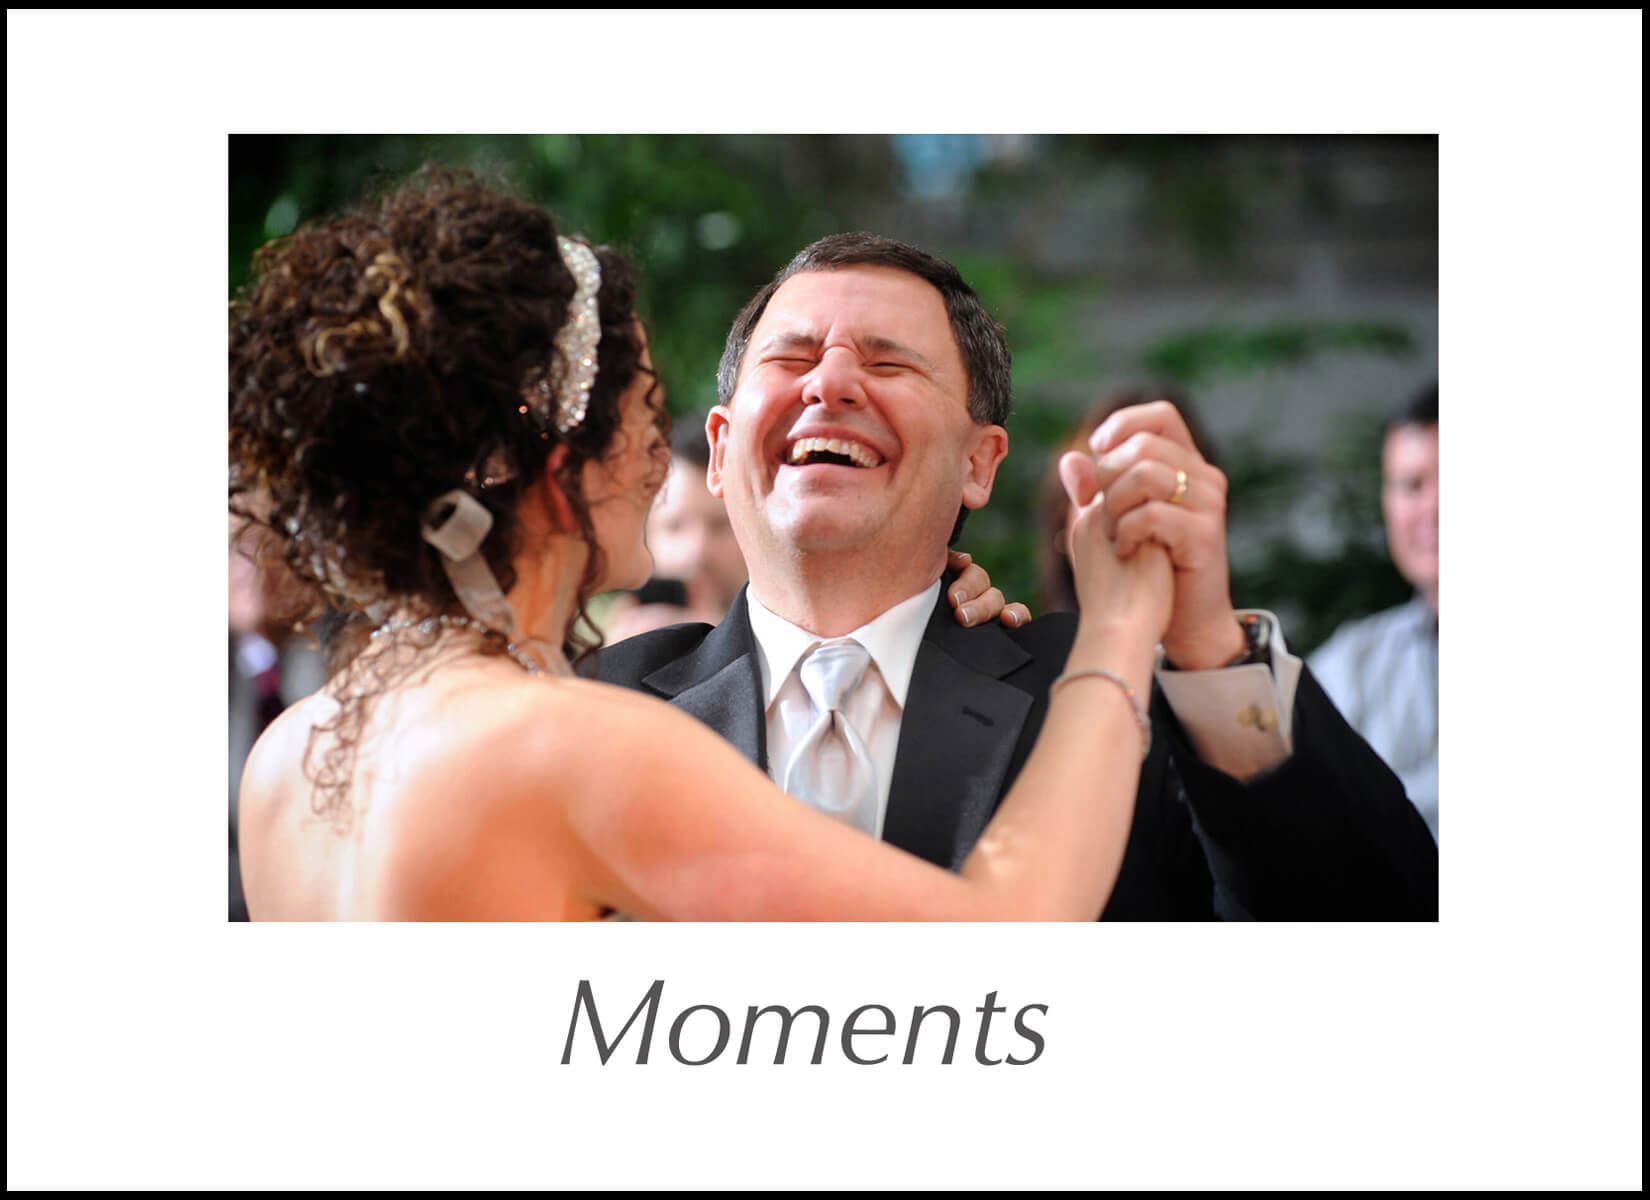 Metro Detroit wedding photographer's gallery of some favorite candid wedding day moments from her portfolio of Michigan weddings.